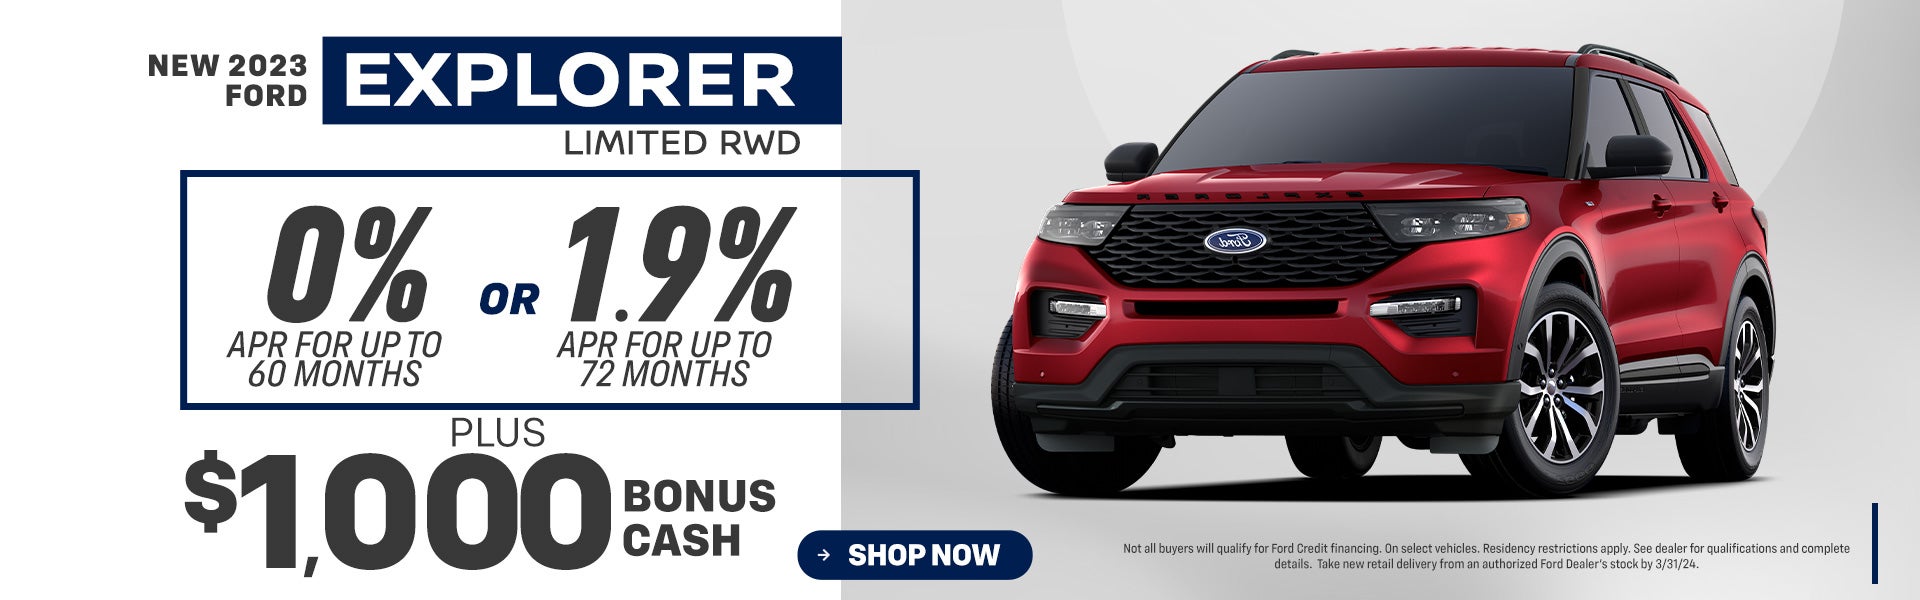 2023 Explorer 0% ARP for 60 Months or 1.9% APR for 72 mont